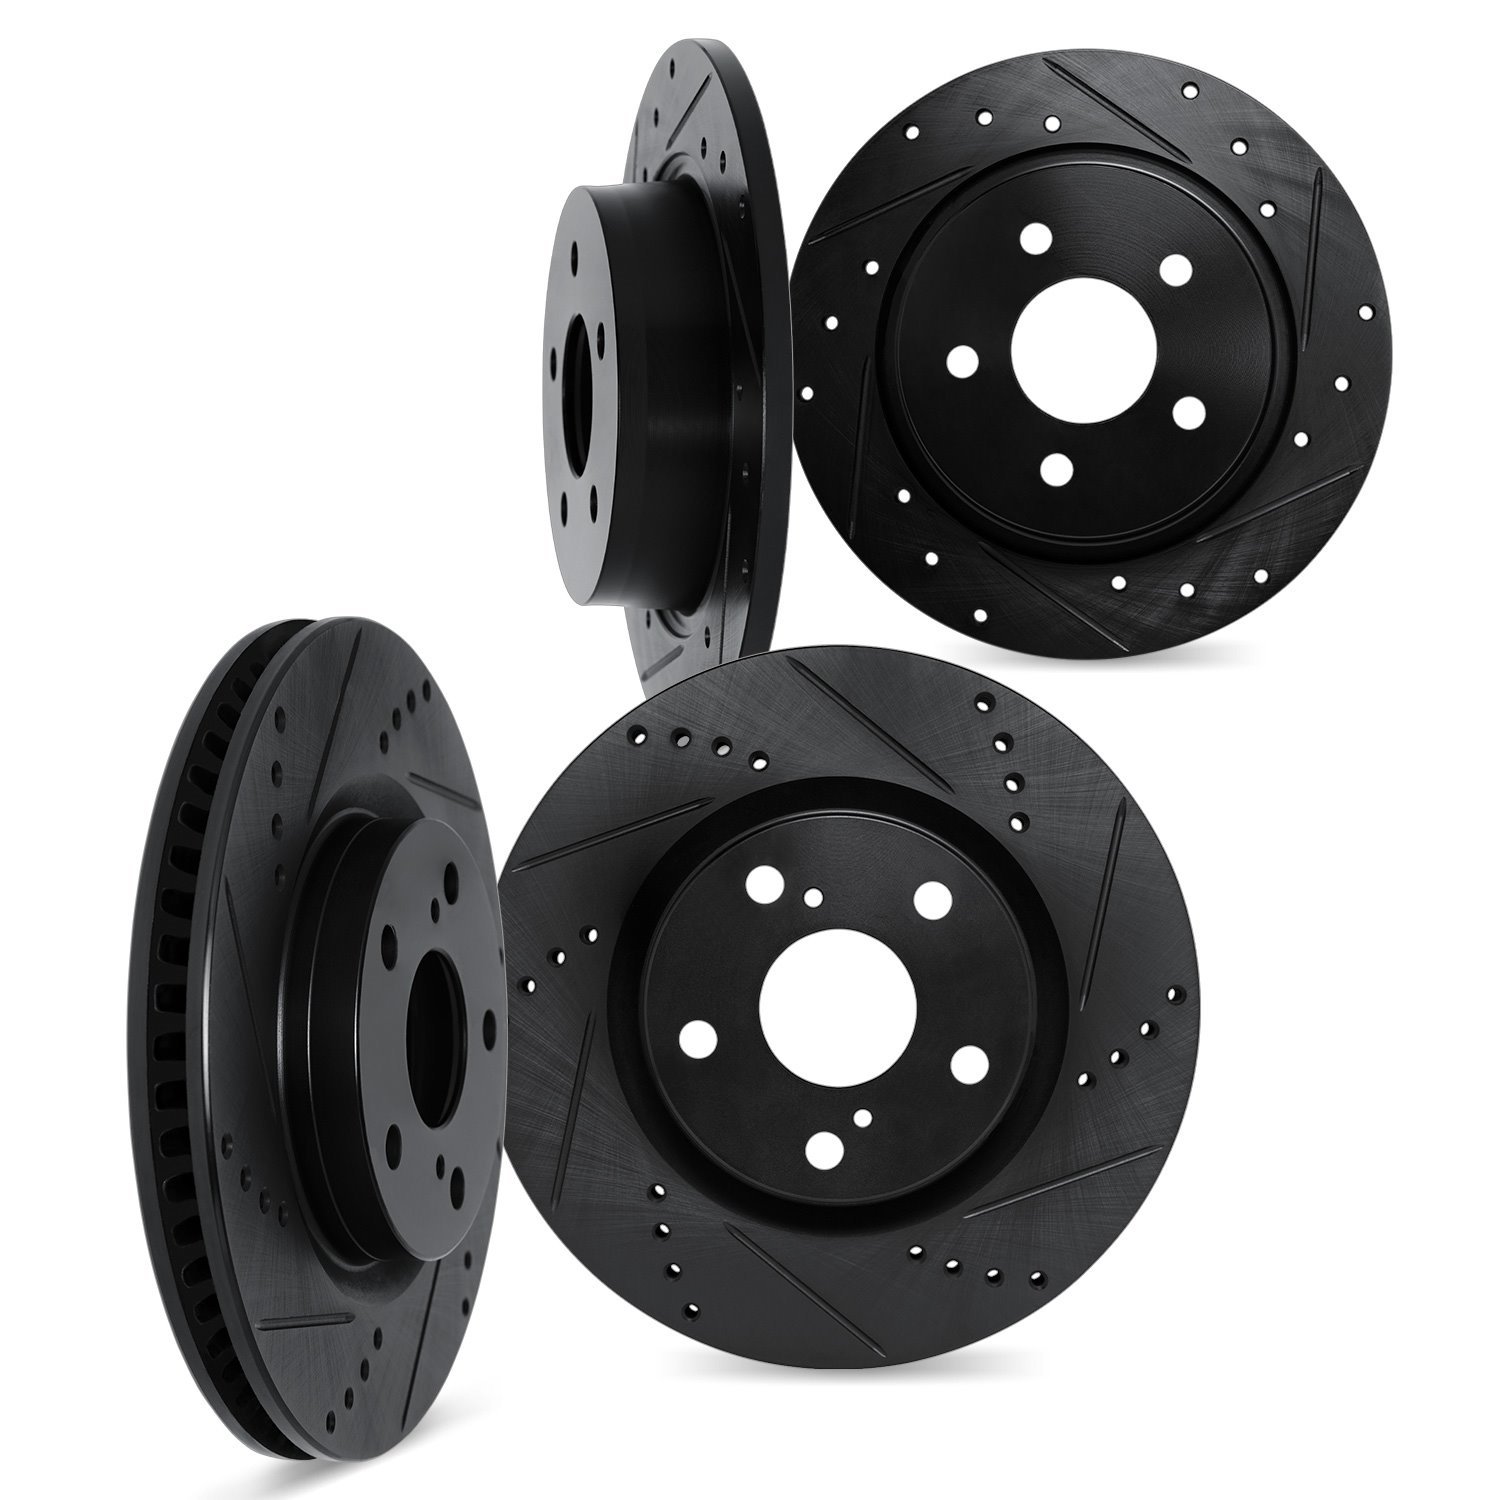 8004-42007 Drilled/Slotted Brake Rotors [Black], Fits Select Mopar, Position: Front and Rear